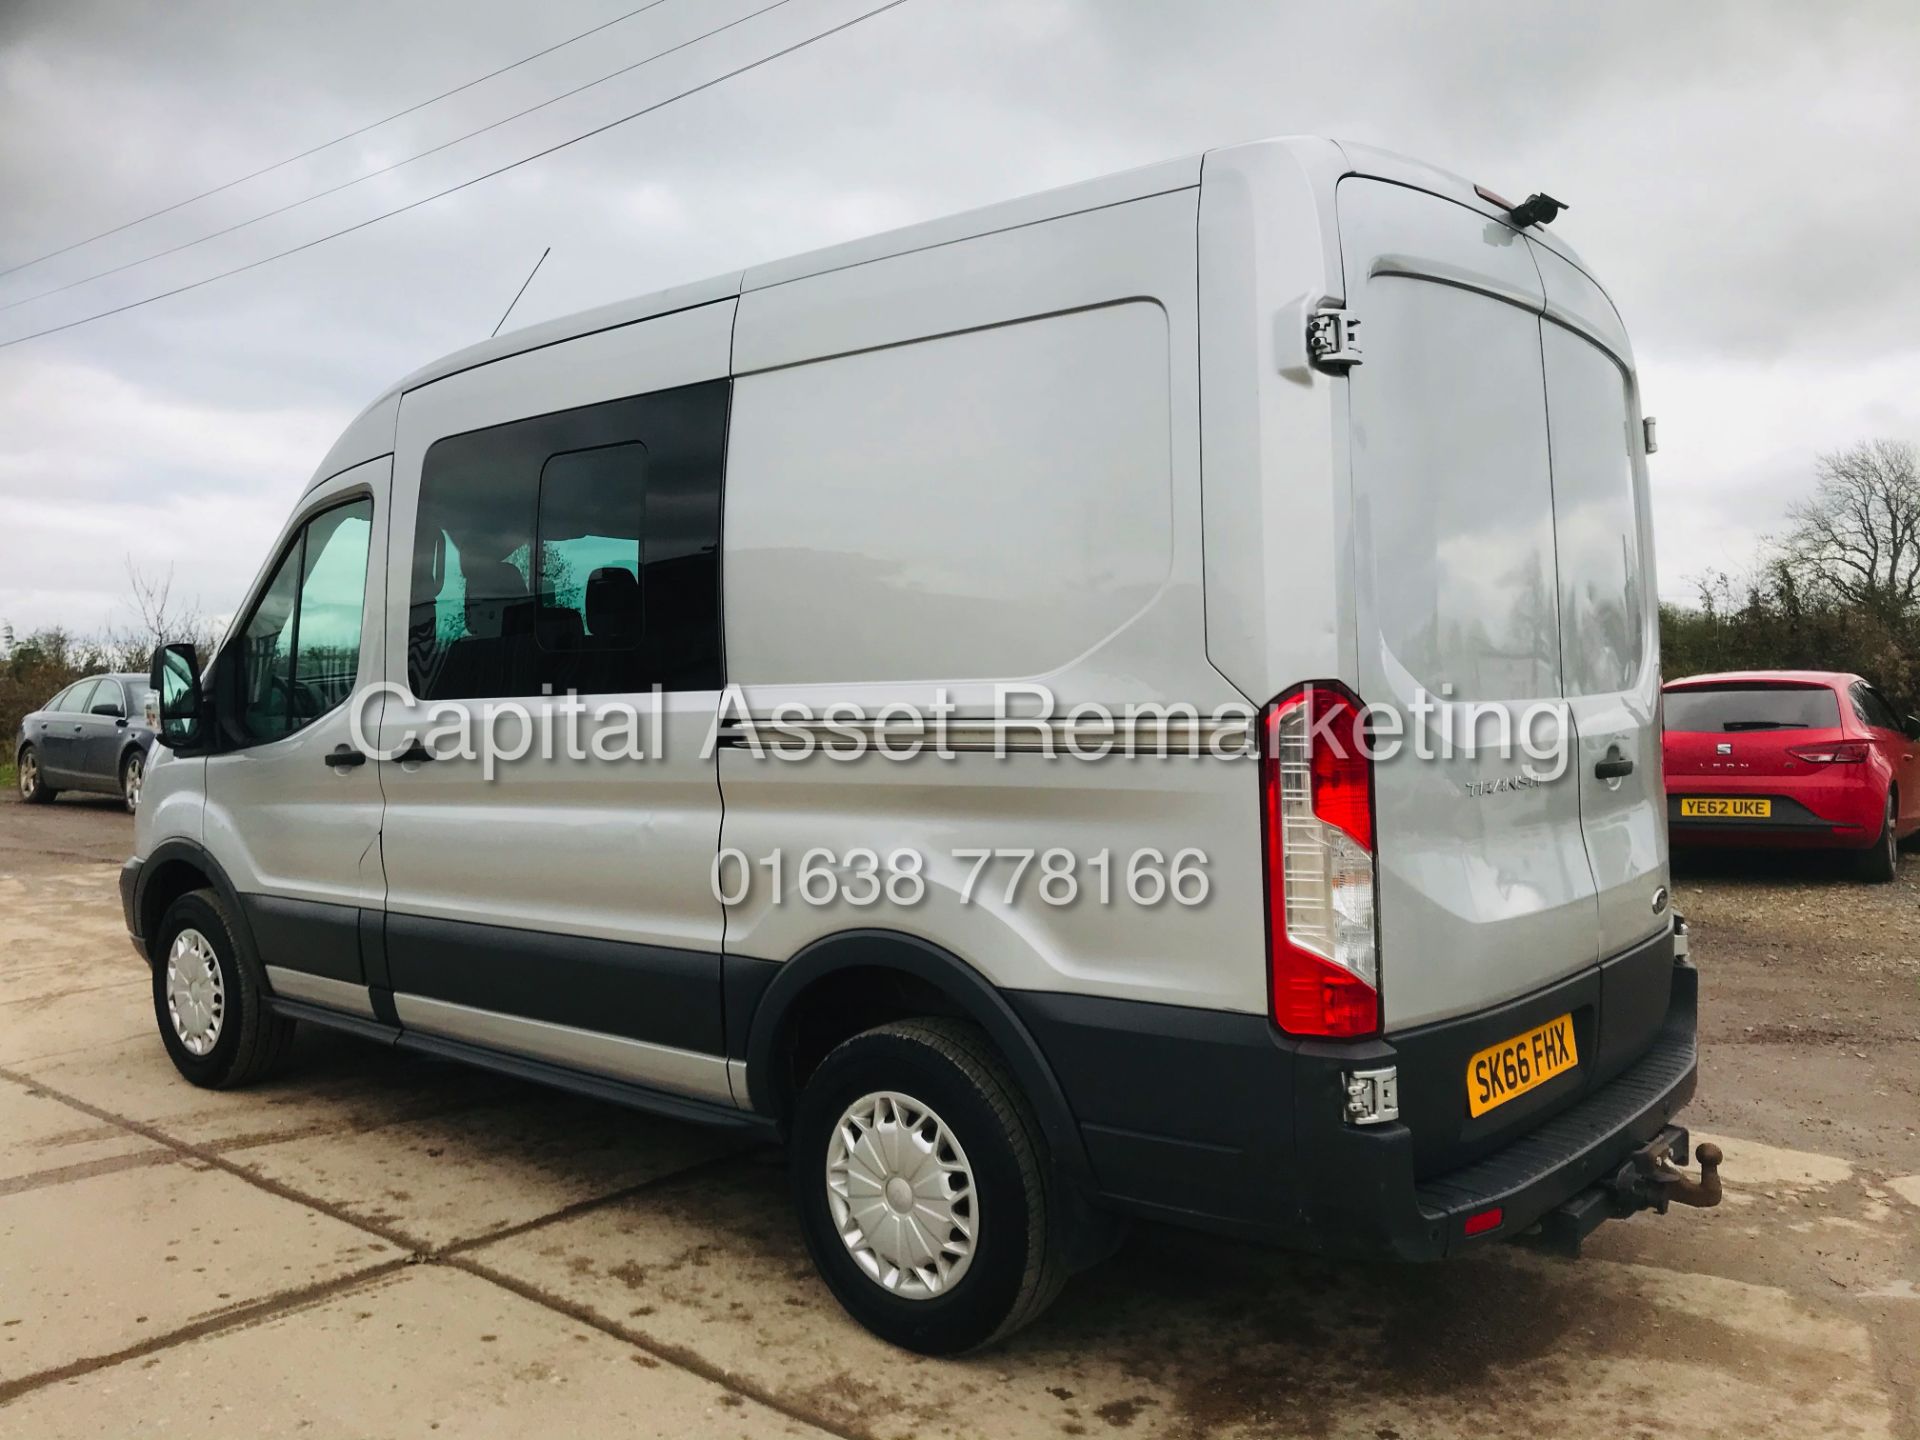 ON SALE FORD TRANSIT 2.2TDCI"TREND"L2H2 -1 OWNER FSH (2017 MODEL) AIR CON*EURO 6* 7 SEATER KOMBI VAN - Image 11 of 20